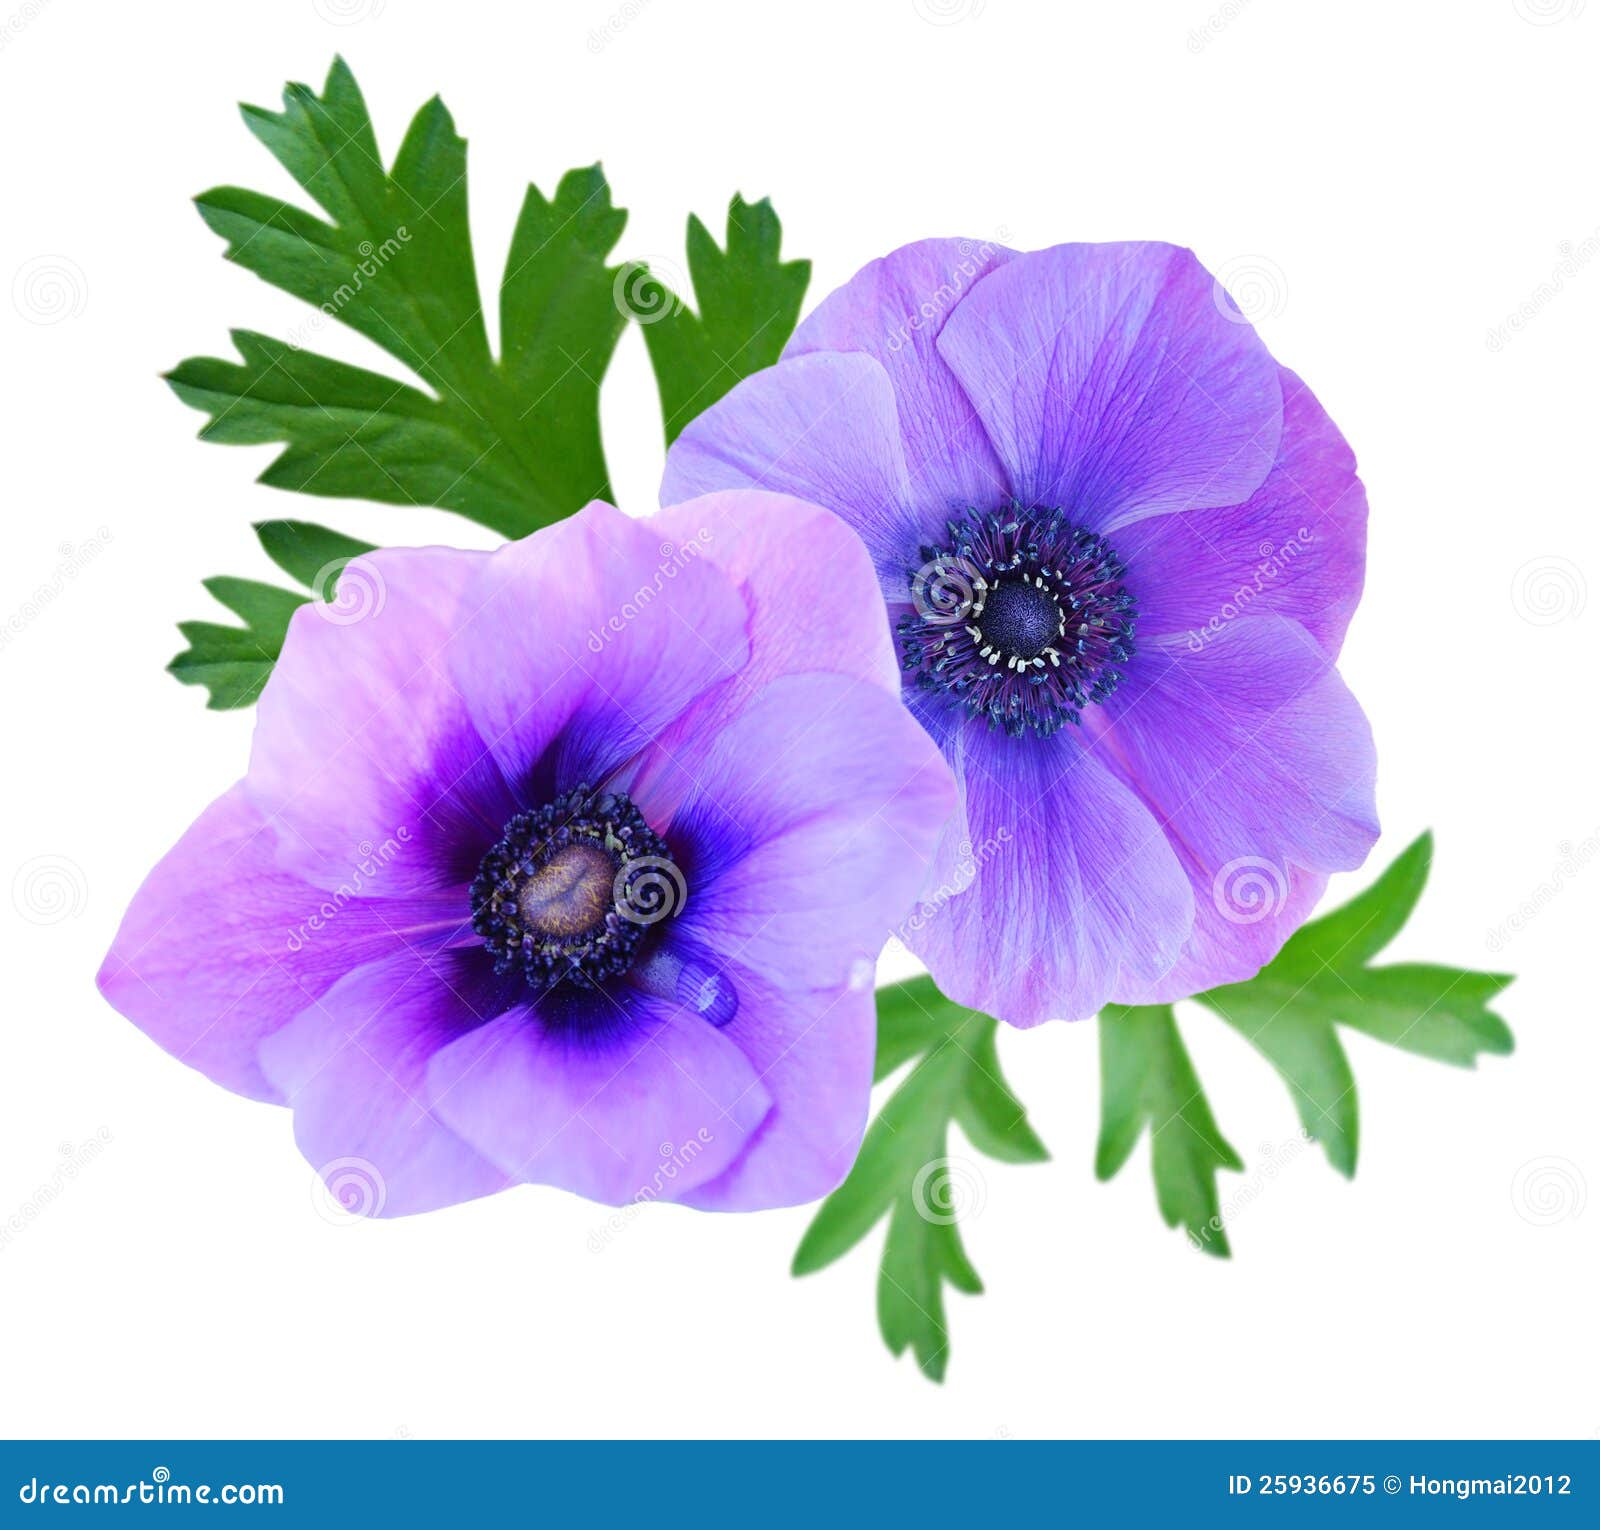 Beautiful Violet Anemone Flower Stock Image - Image of isolated, flora:  25936675